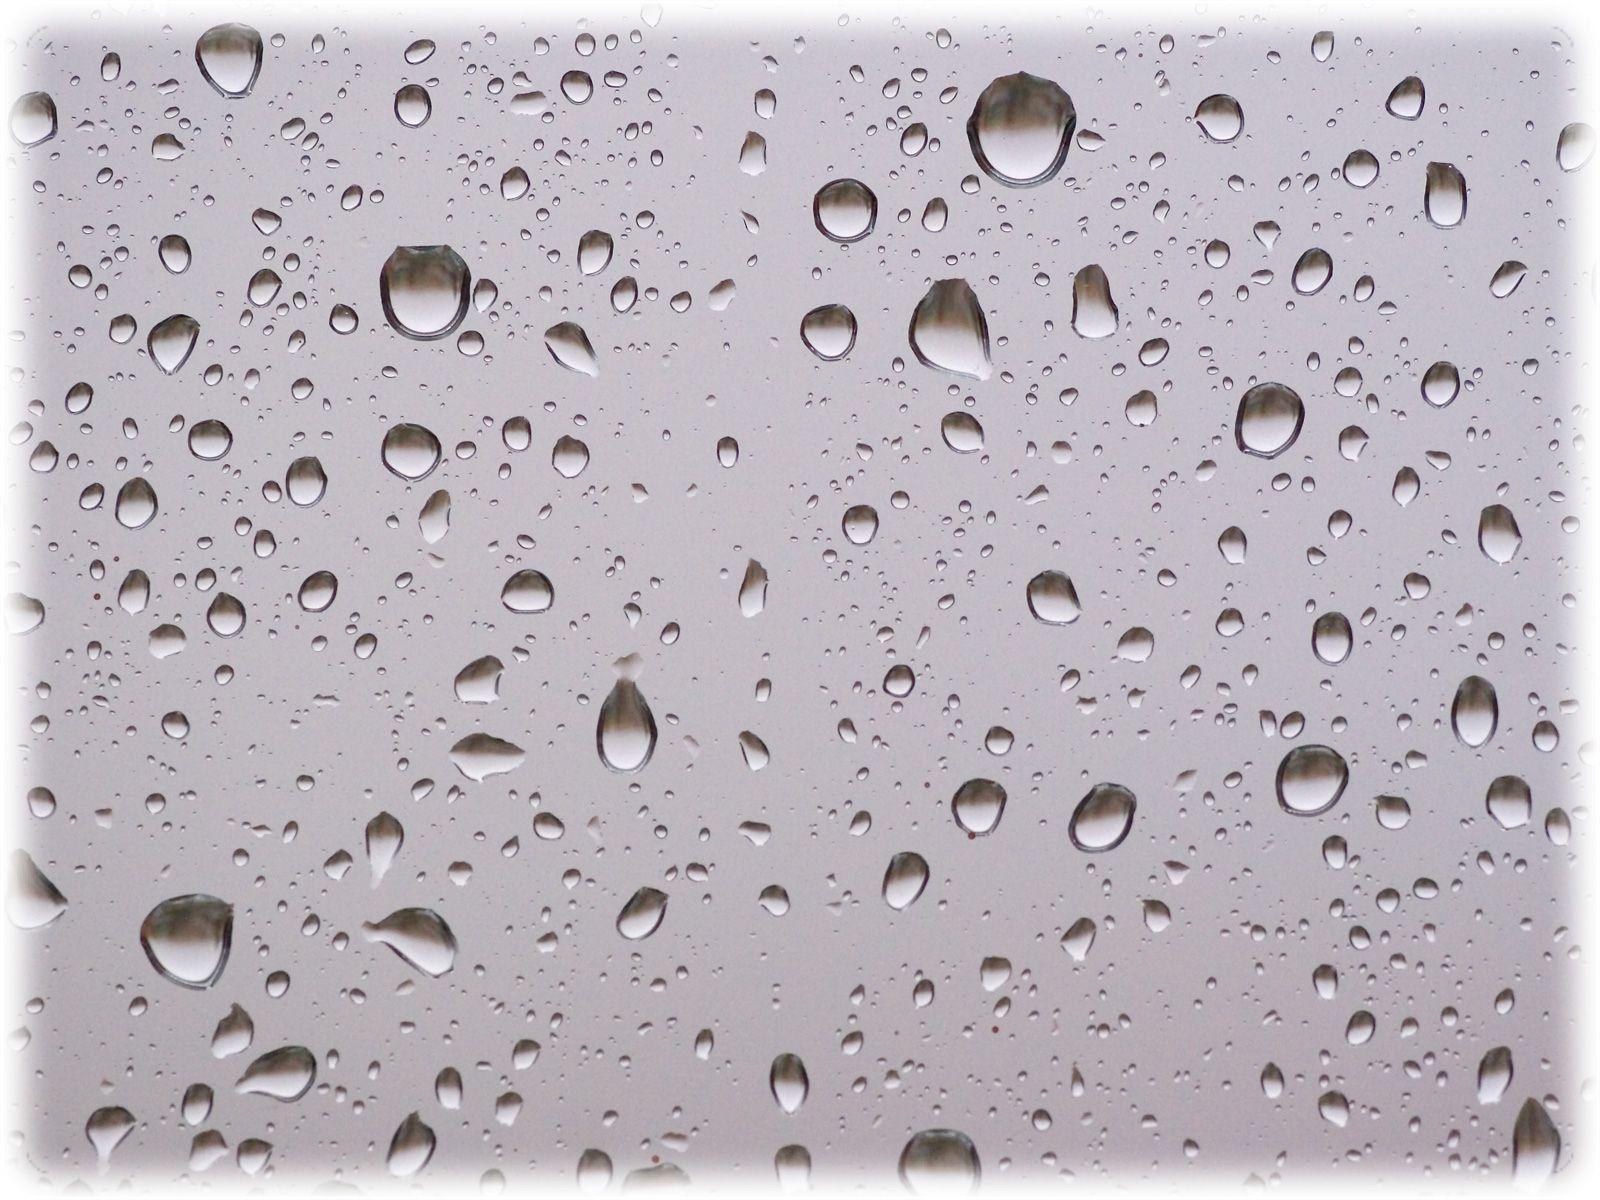 Raindrops Wallpaper Background 30057 HD Picture. Top Background